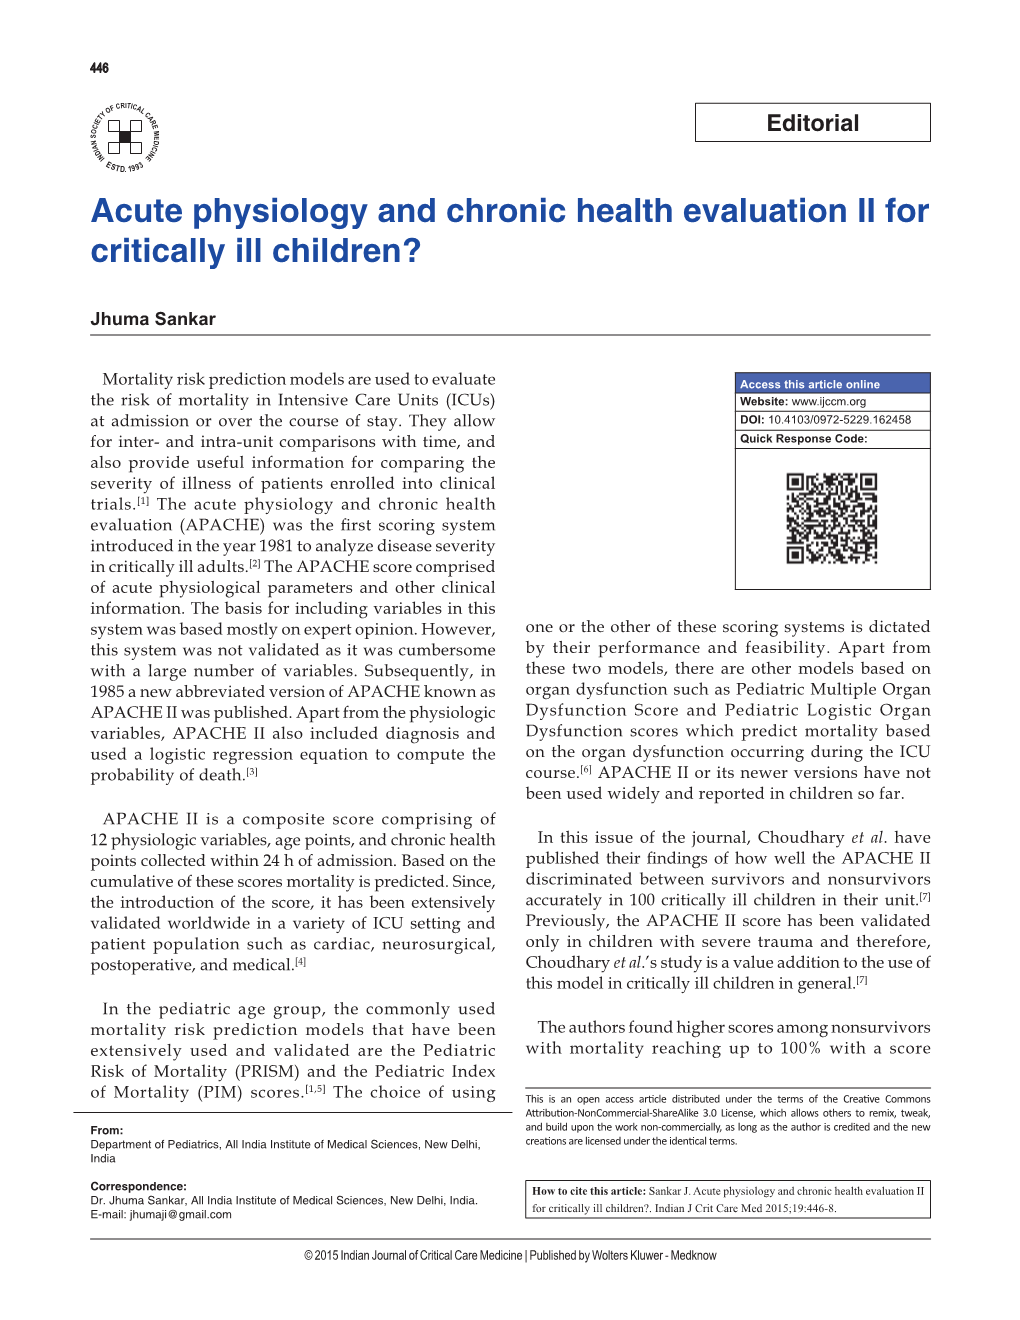 Acute Physiology and Chronic Health Evaluation II for Critically Ill Children?